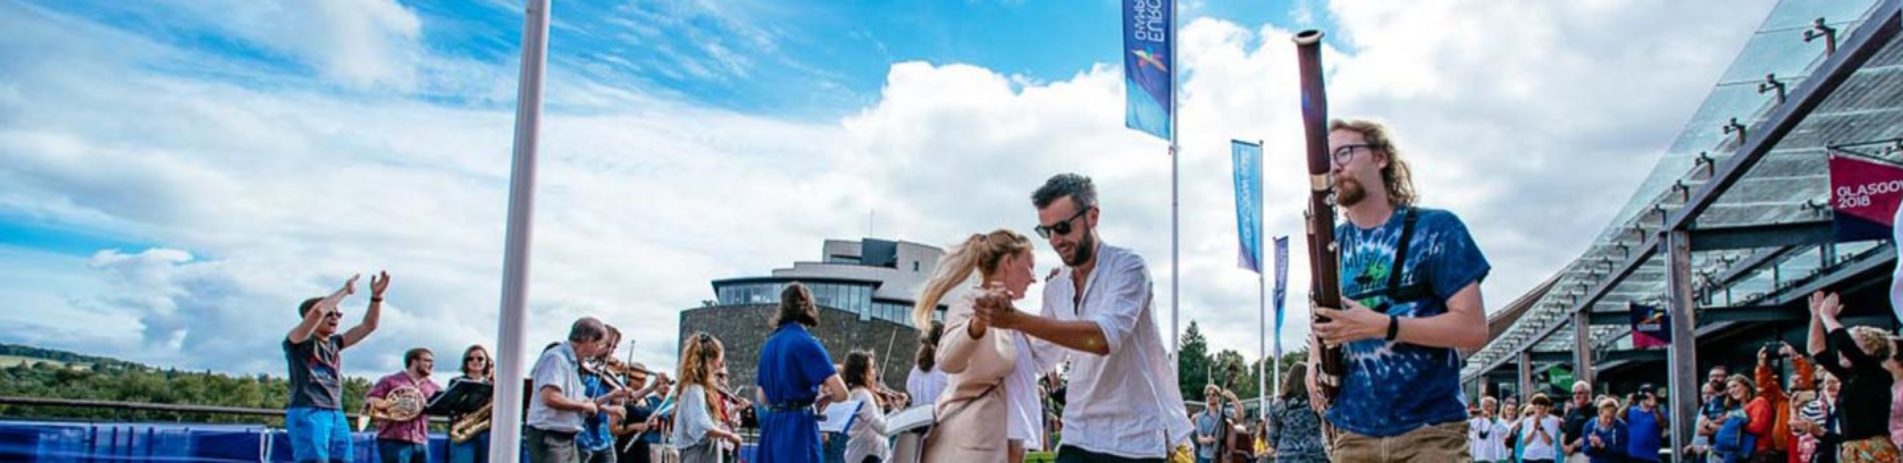 couples-dancing-surrounded-by-people-playing-instruments-and-crowds-cheering-at-lomond-shores-during-balloch-festival-two-thousand-eighteen